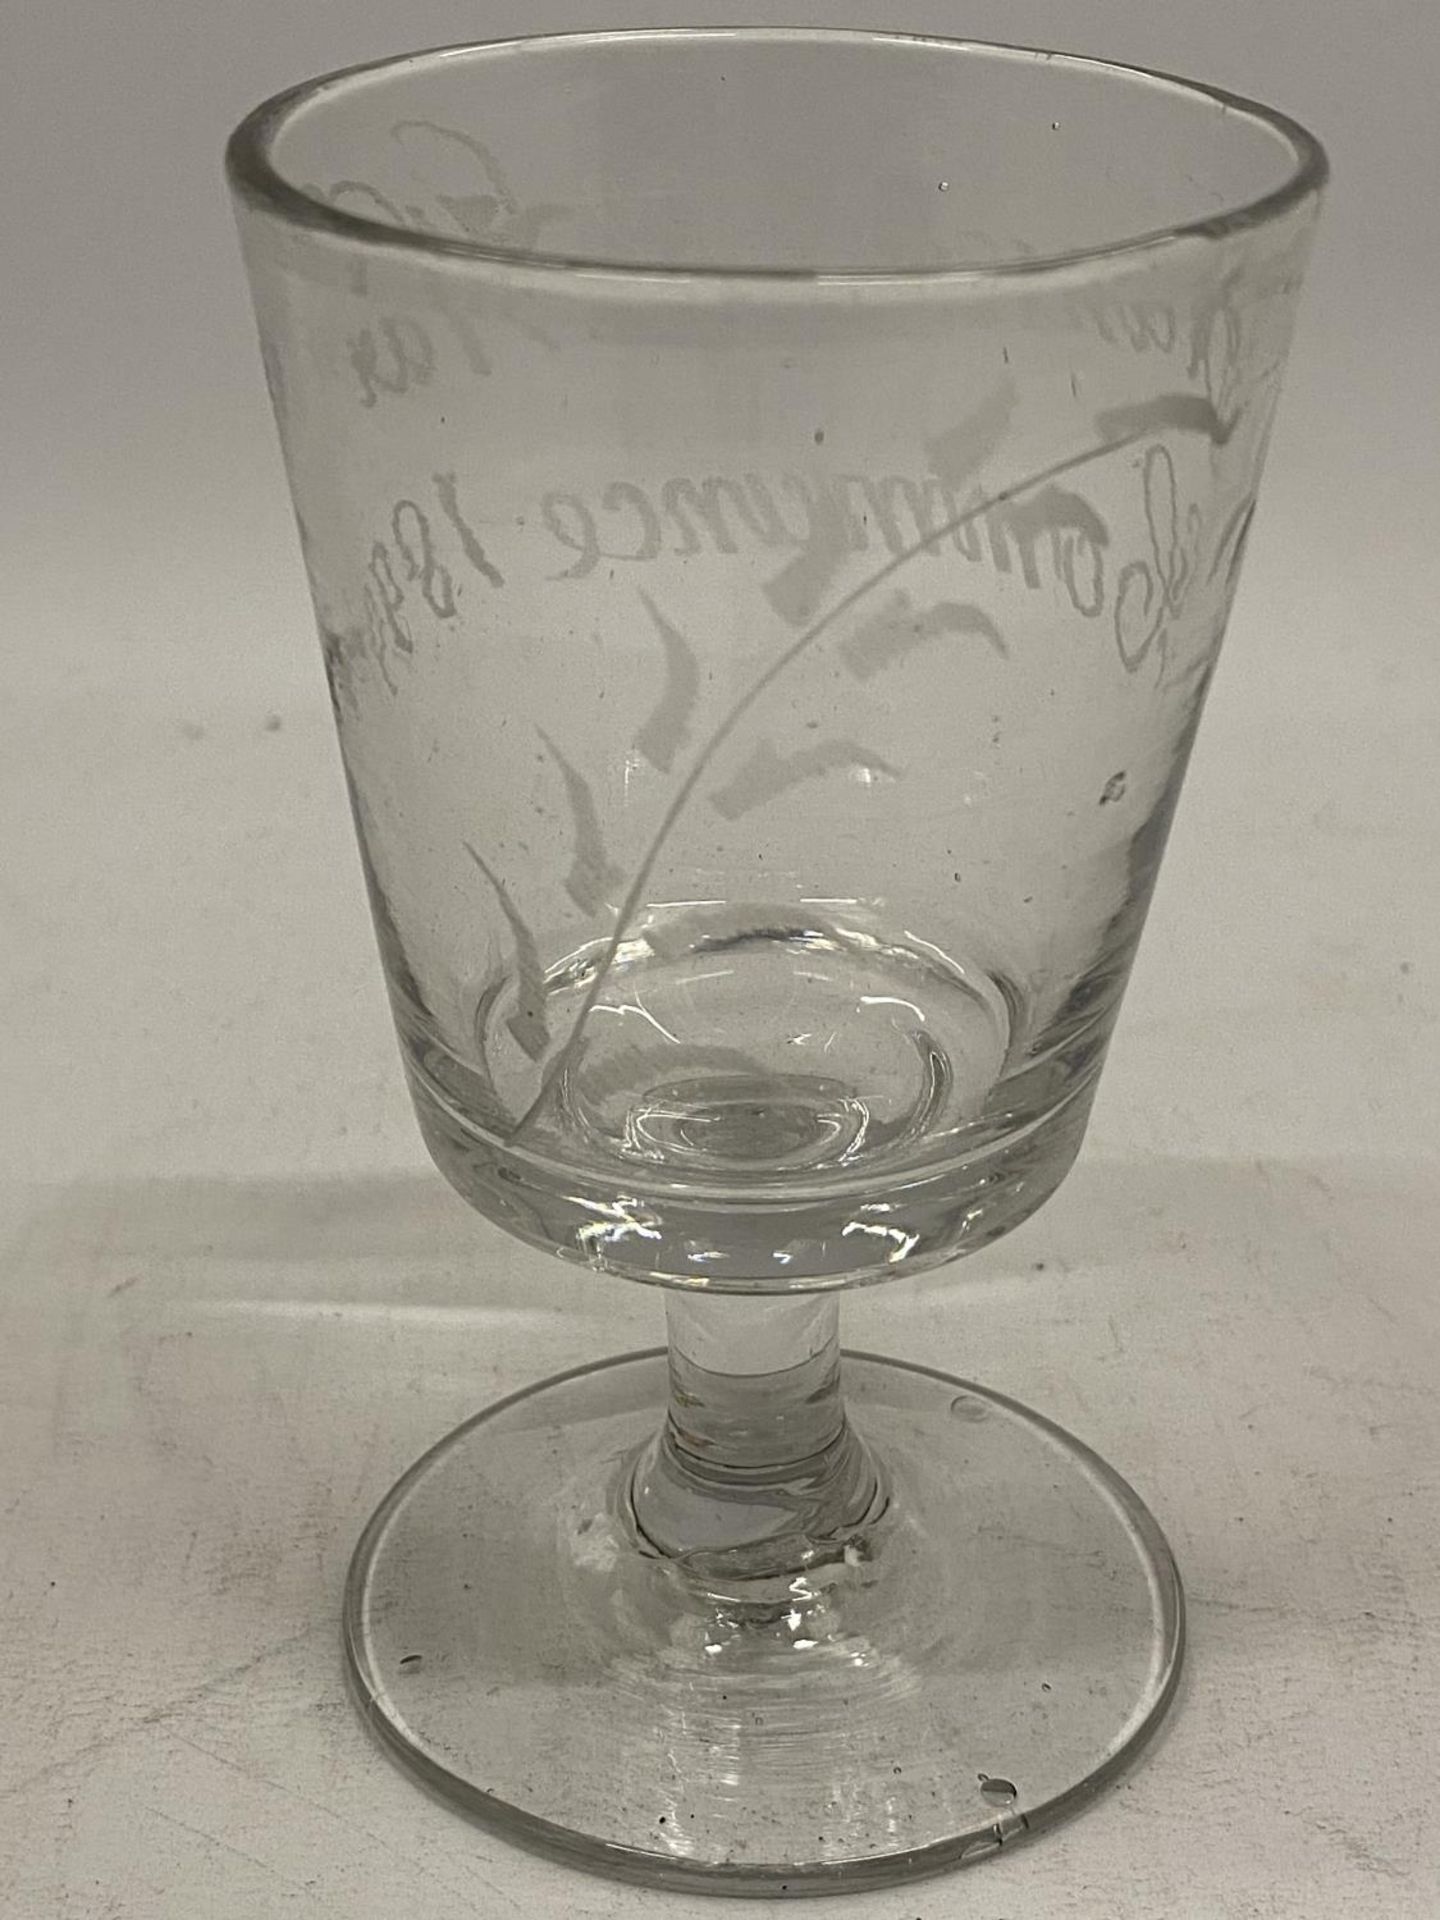 A VICTORIAN DRINKING GLASS WITH THE INSCRIPTION TRANSVAAL WAR 1899 - Image 2 of 3